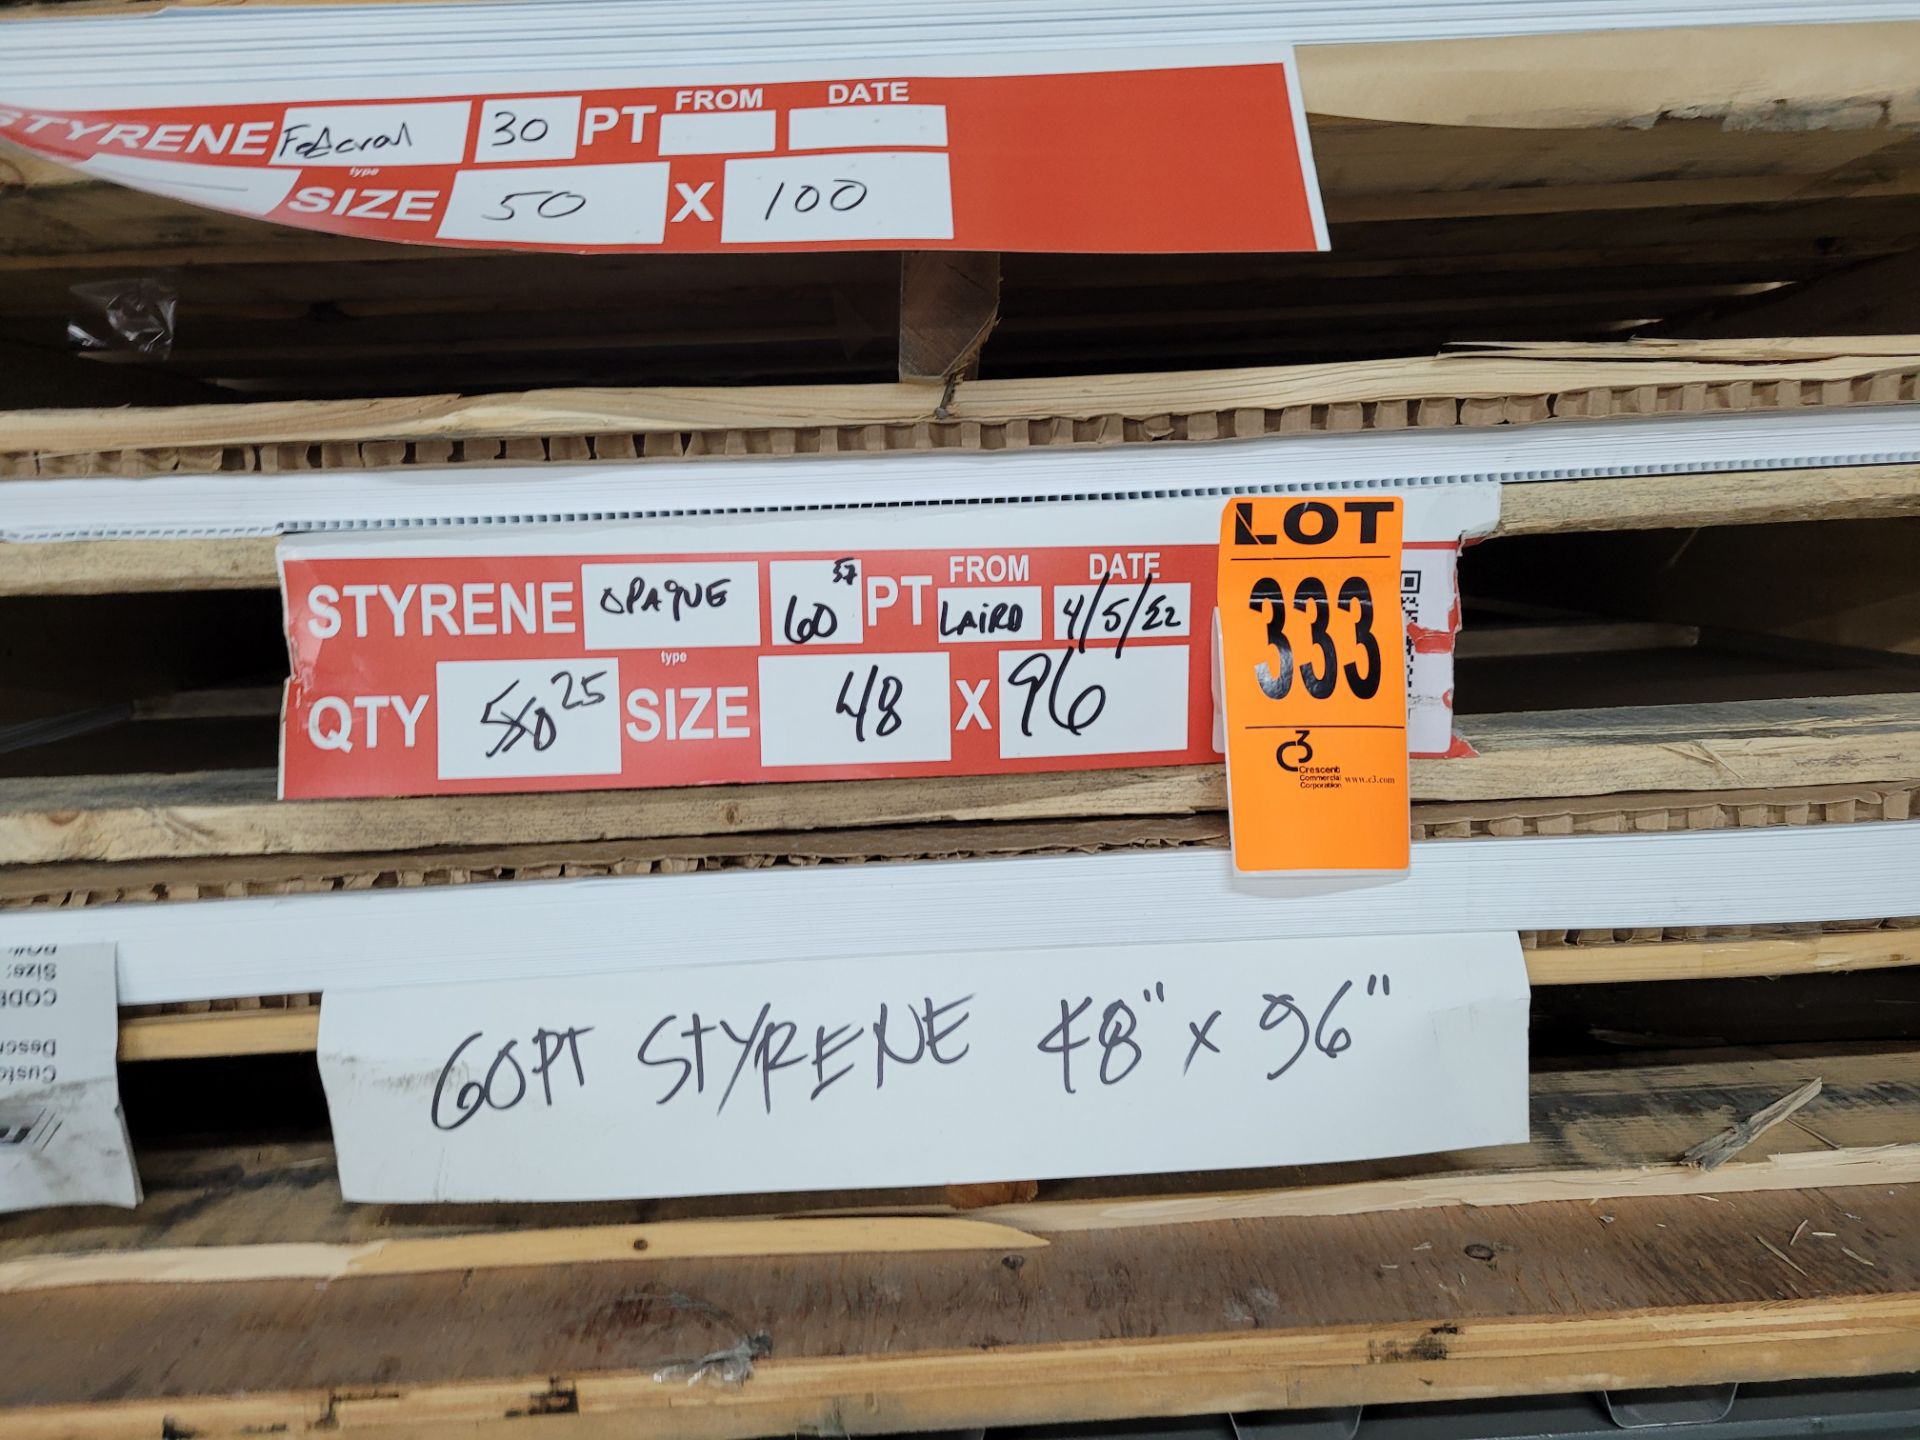 Lot of (5) Pallets of STYRENE Sheets and contents incl. 60pt Styrene 48x96, 25x 60pt 48x96, Styrene - Image 2 of 5